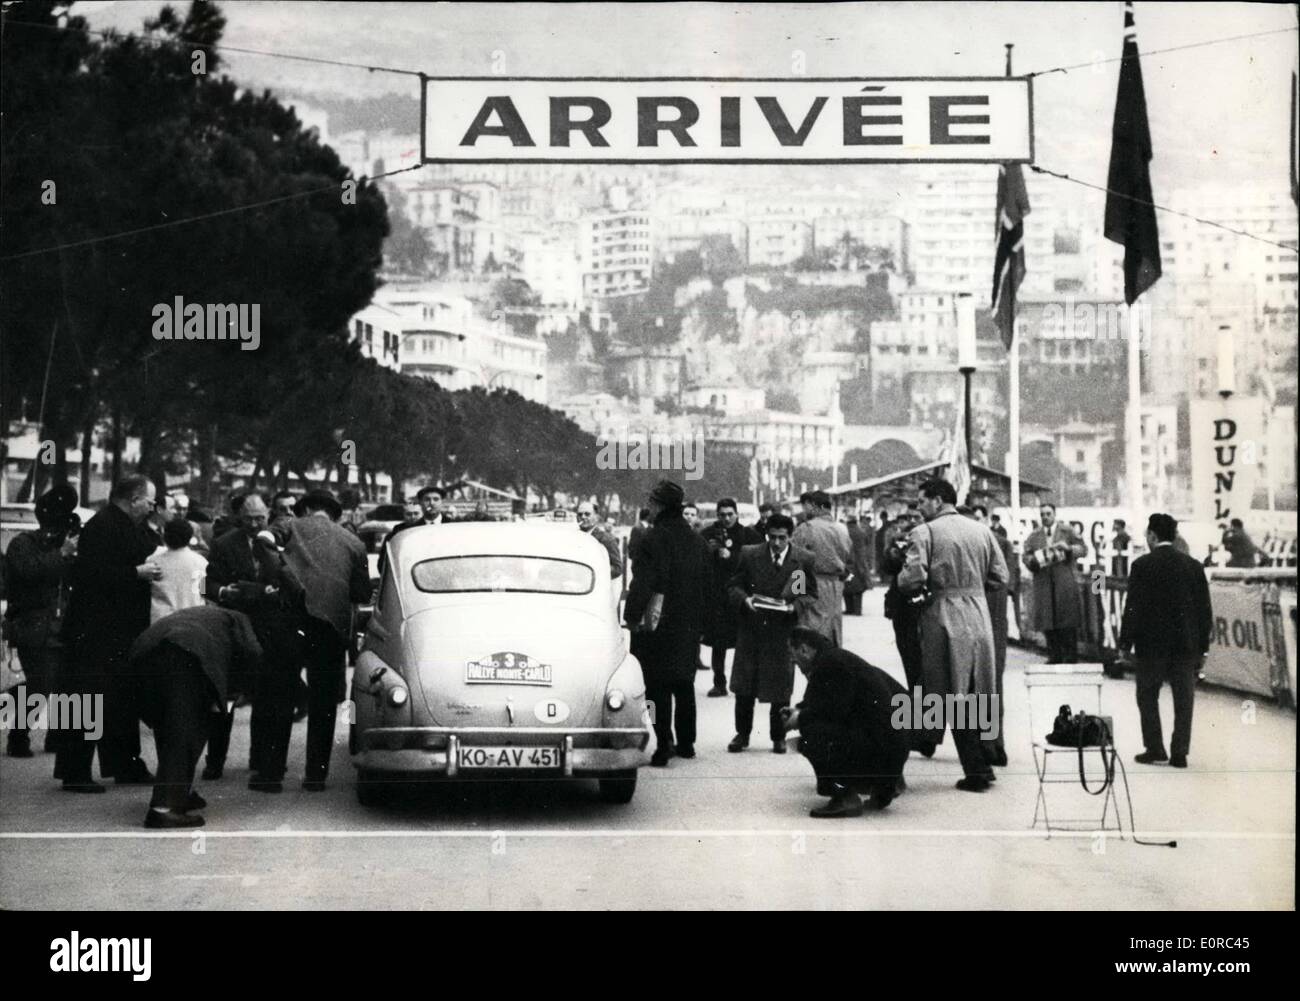 Jan. 01, 1959 - MONTE CARLO RALLY: OPS.: The first car arriving at the control point at Monte-Carlo yesterday. The car, a Volkswagen, is driven by the German team Rtuh Lautmann and Gunther Kolwes who started from Liston. Stock Photo